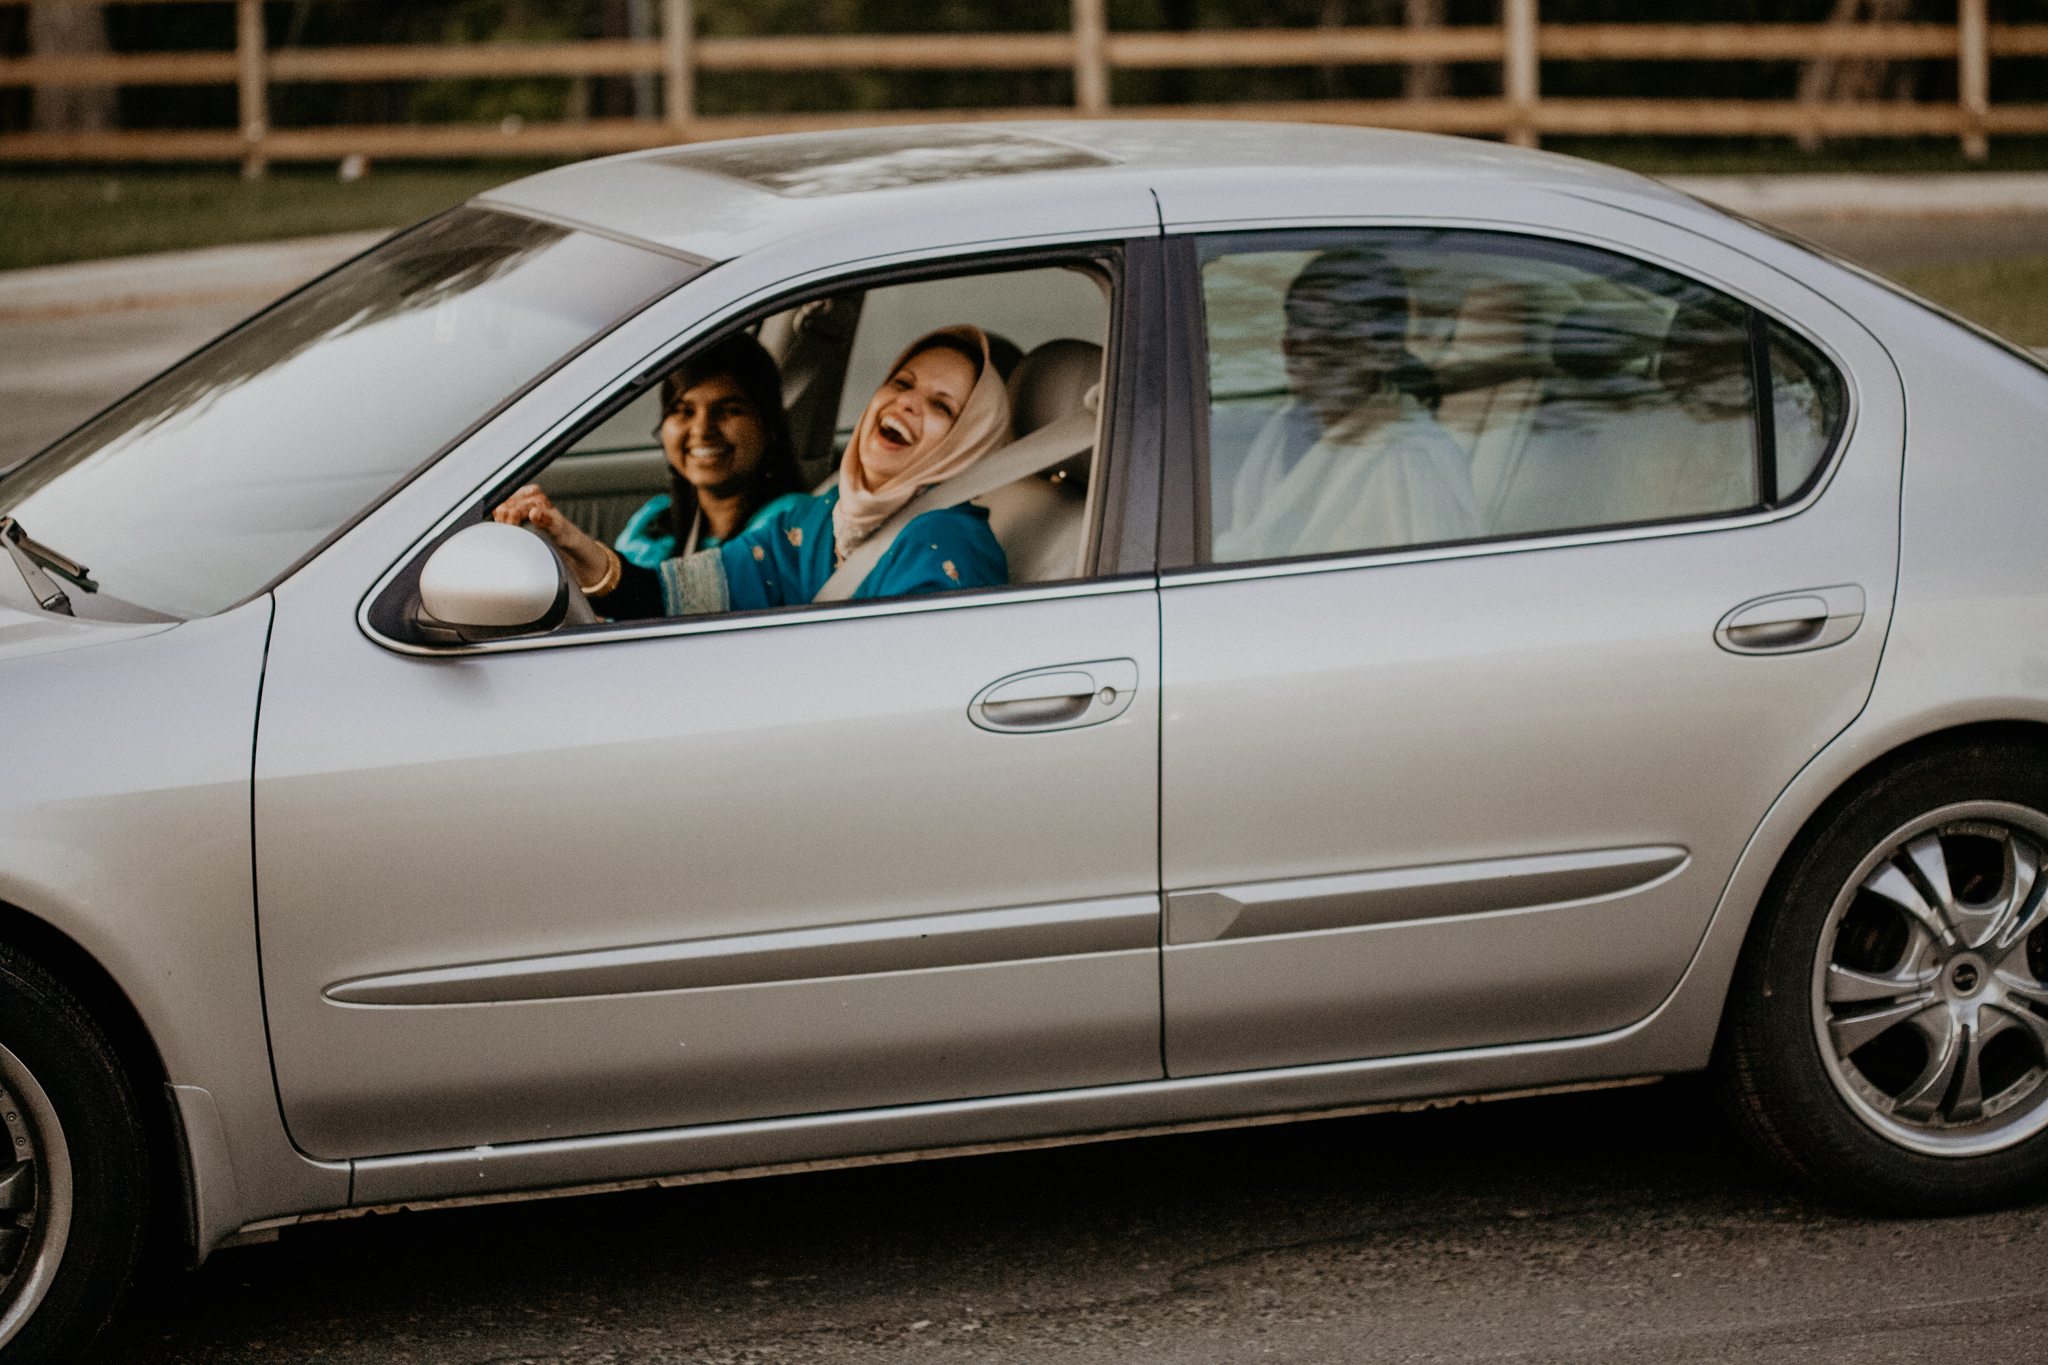 Candid photo of mother of bride arriving in car to ceremony